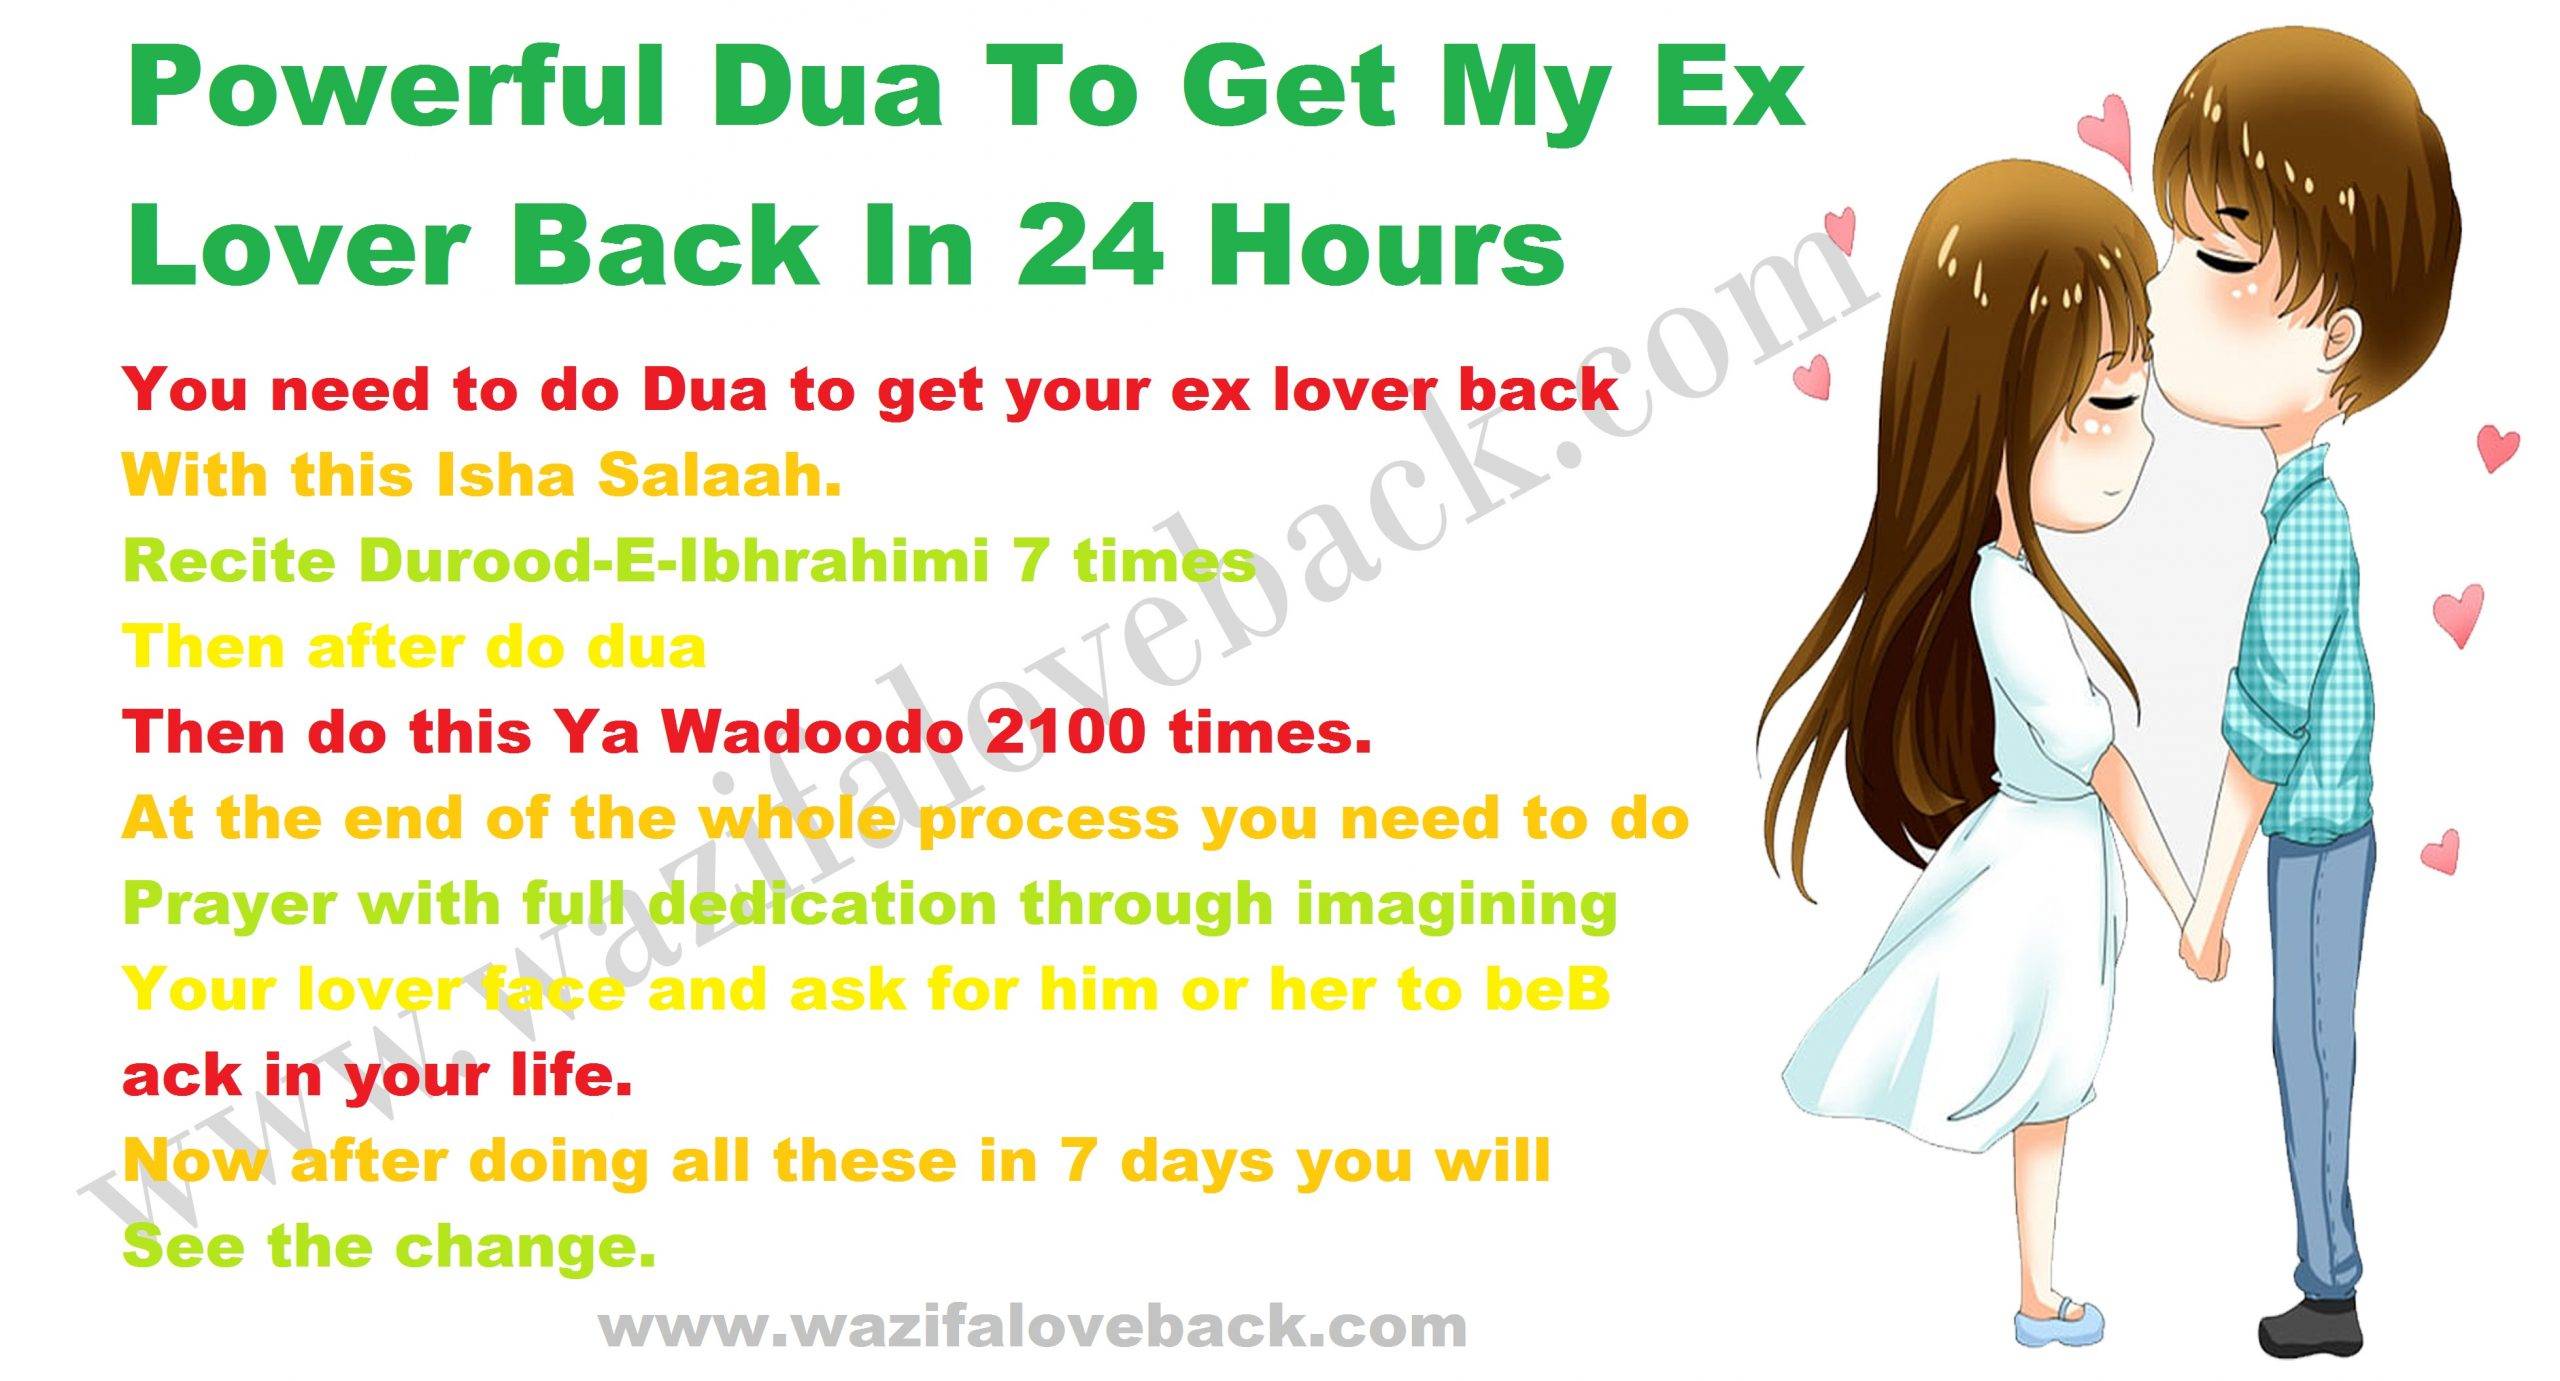 Powerful Dua To Get My Ex Lover Back In 24 Hours